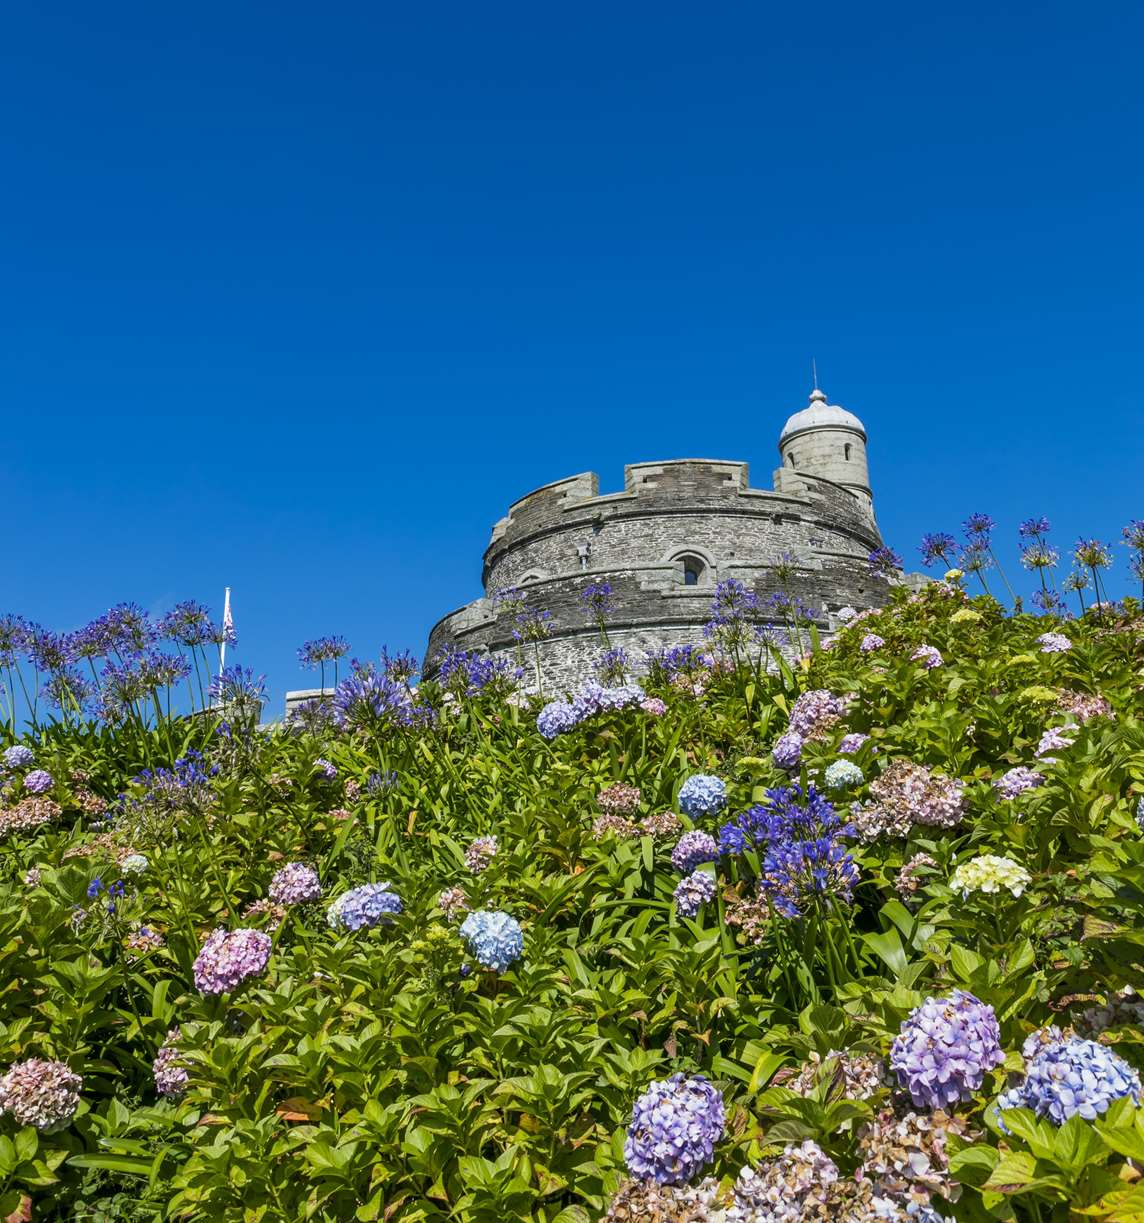 Image: Hydrangeas in bloom at St Mawes Castle